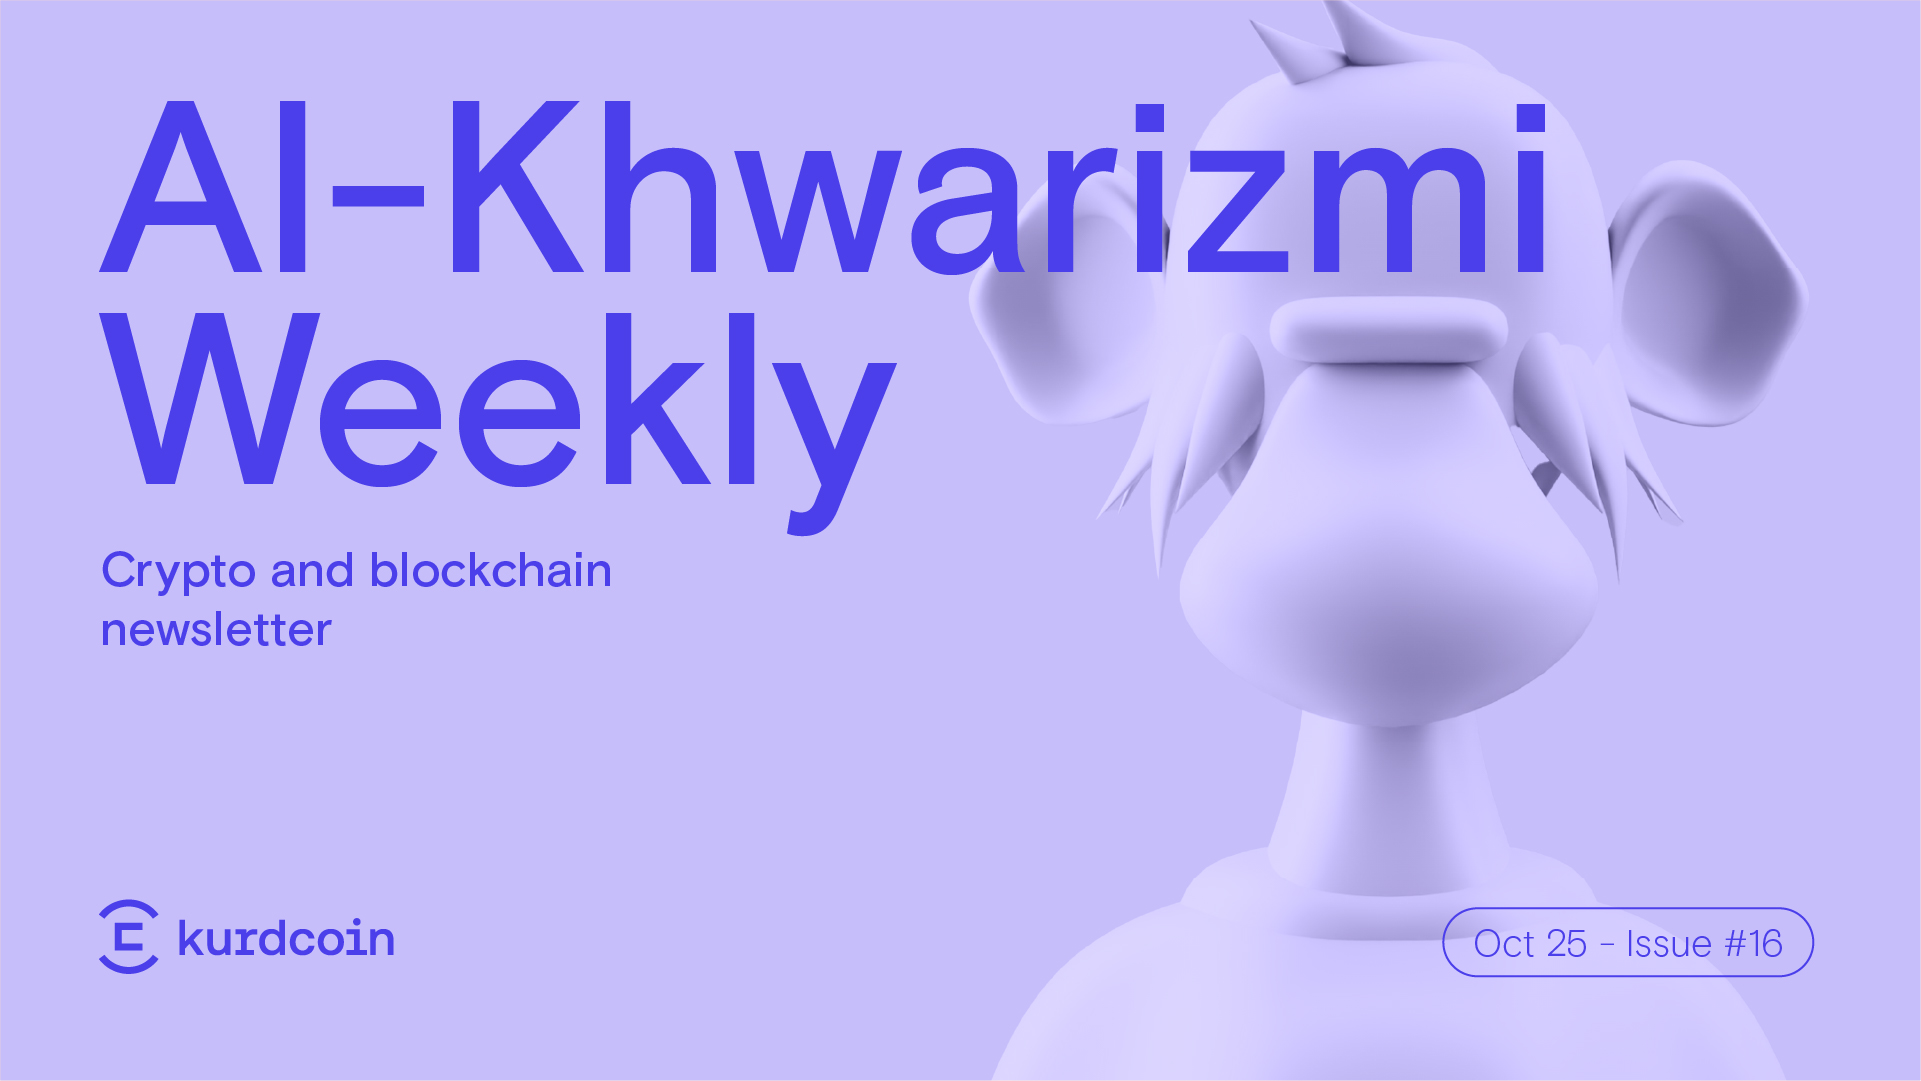 Number 1 crypto newsletter in middle-east